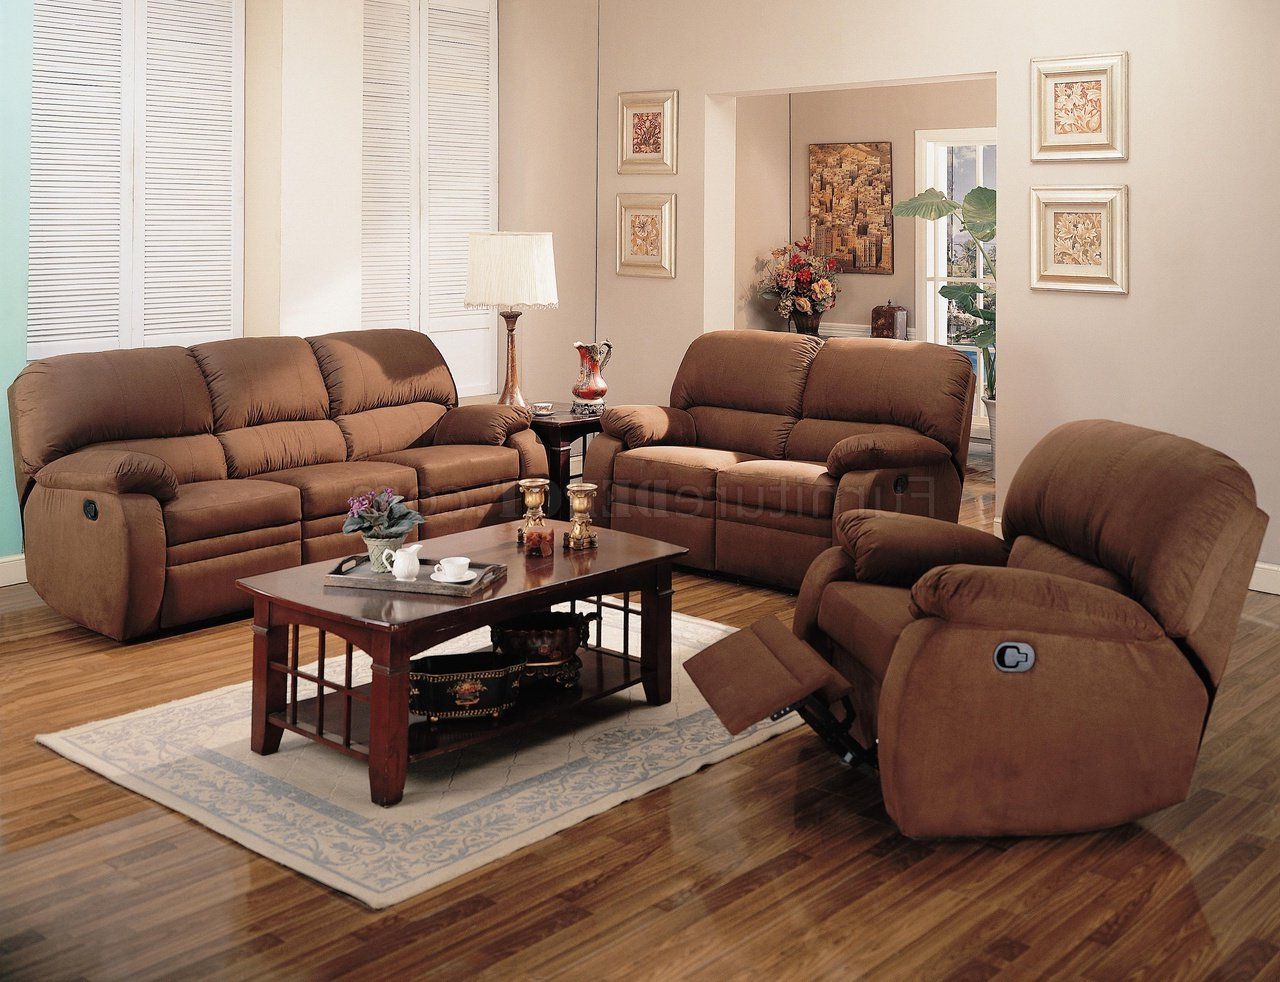 Current Soft Chocolate Microfiber Reclining Living Room Sofa W/options Pertaining To 2 Tone Chocolate Microfiber Sofas (View 7 of 15)